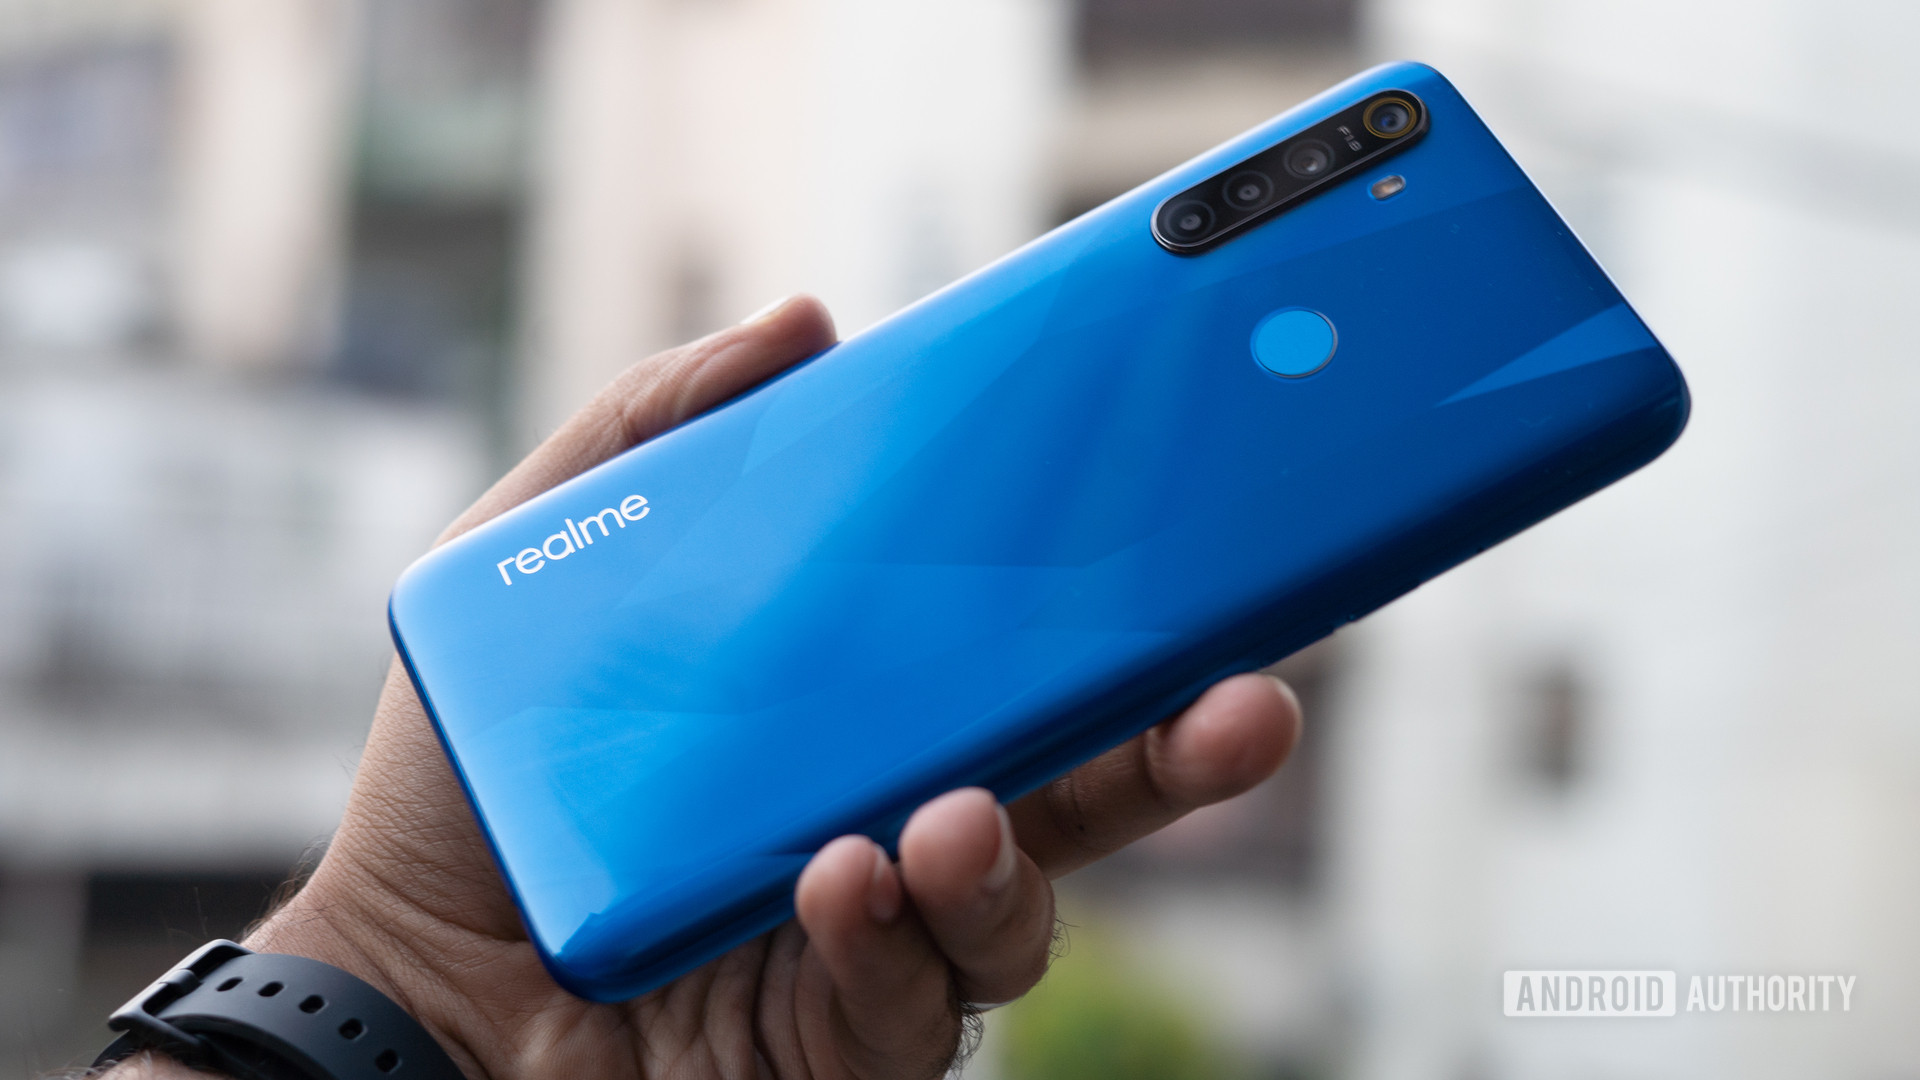 Realme 5 in hand showing back of phone